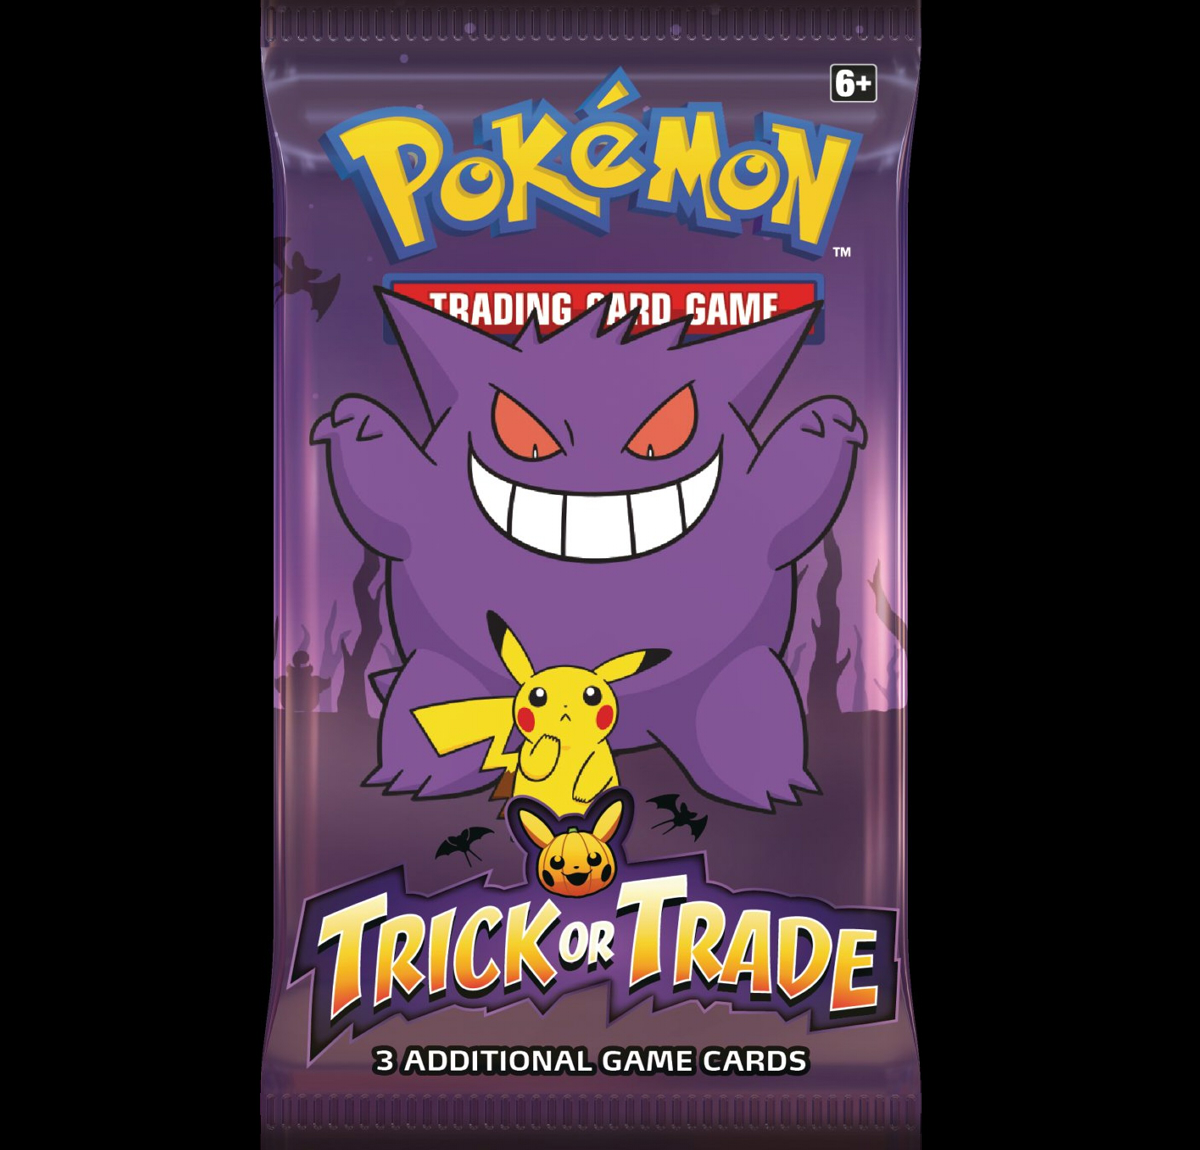 A Gengar scares a Pikachu on the cover of the Trick or Trade booster packs.